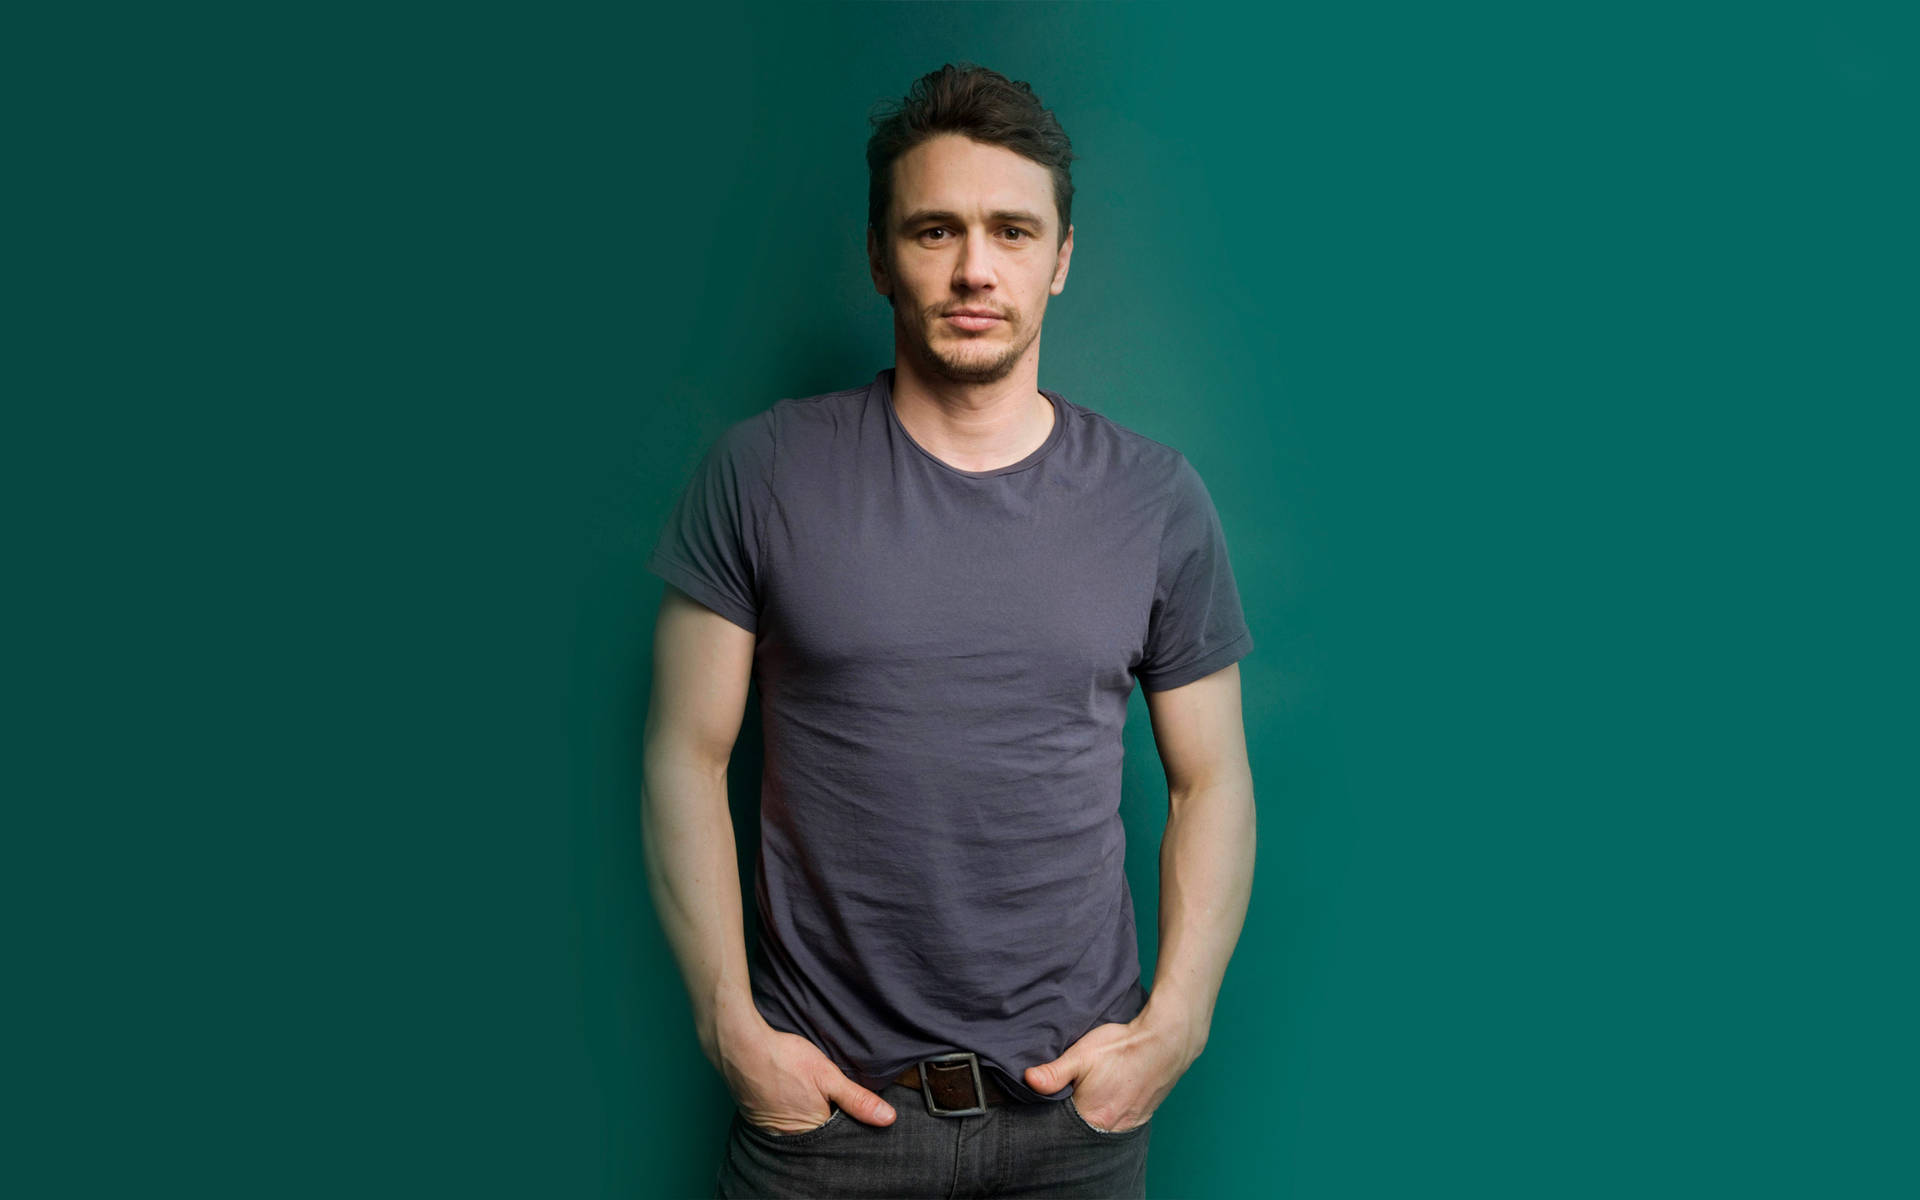 James Franco In Grey Shirt Against A Vibrant Green Background Background